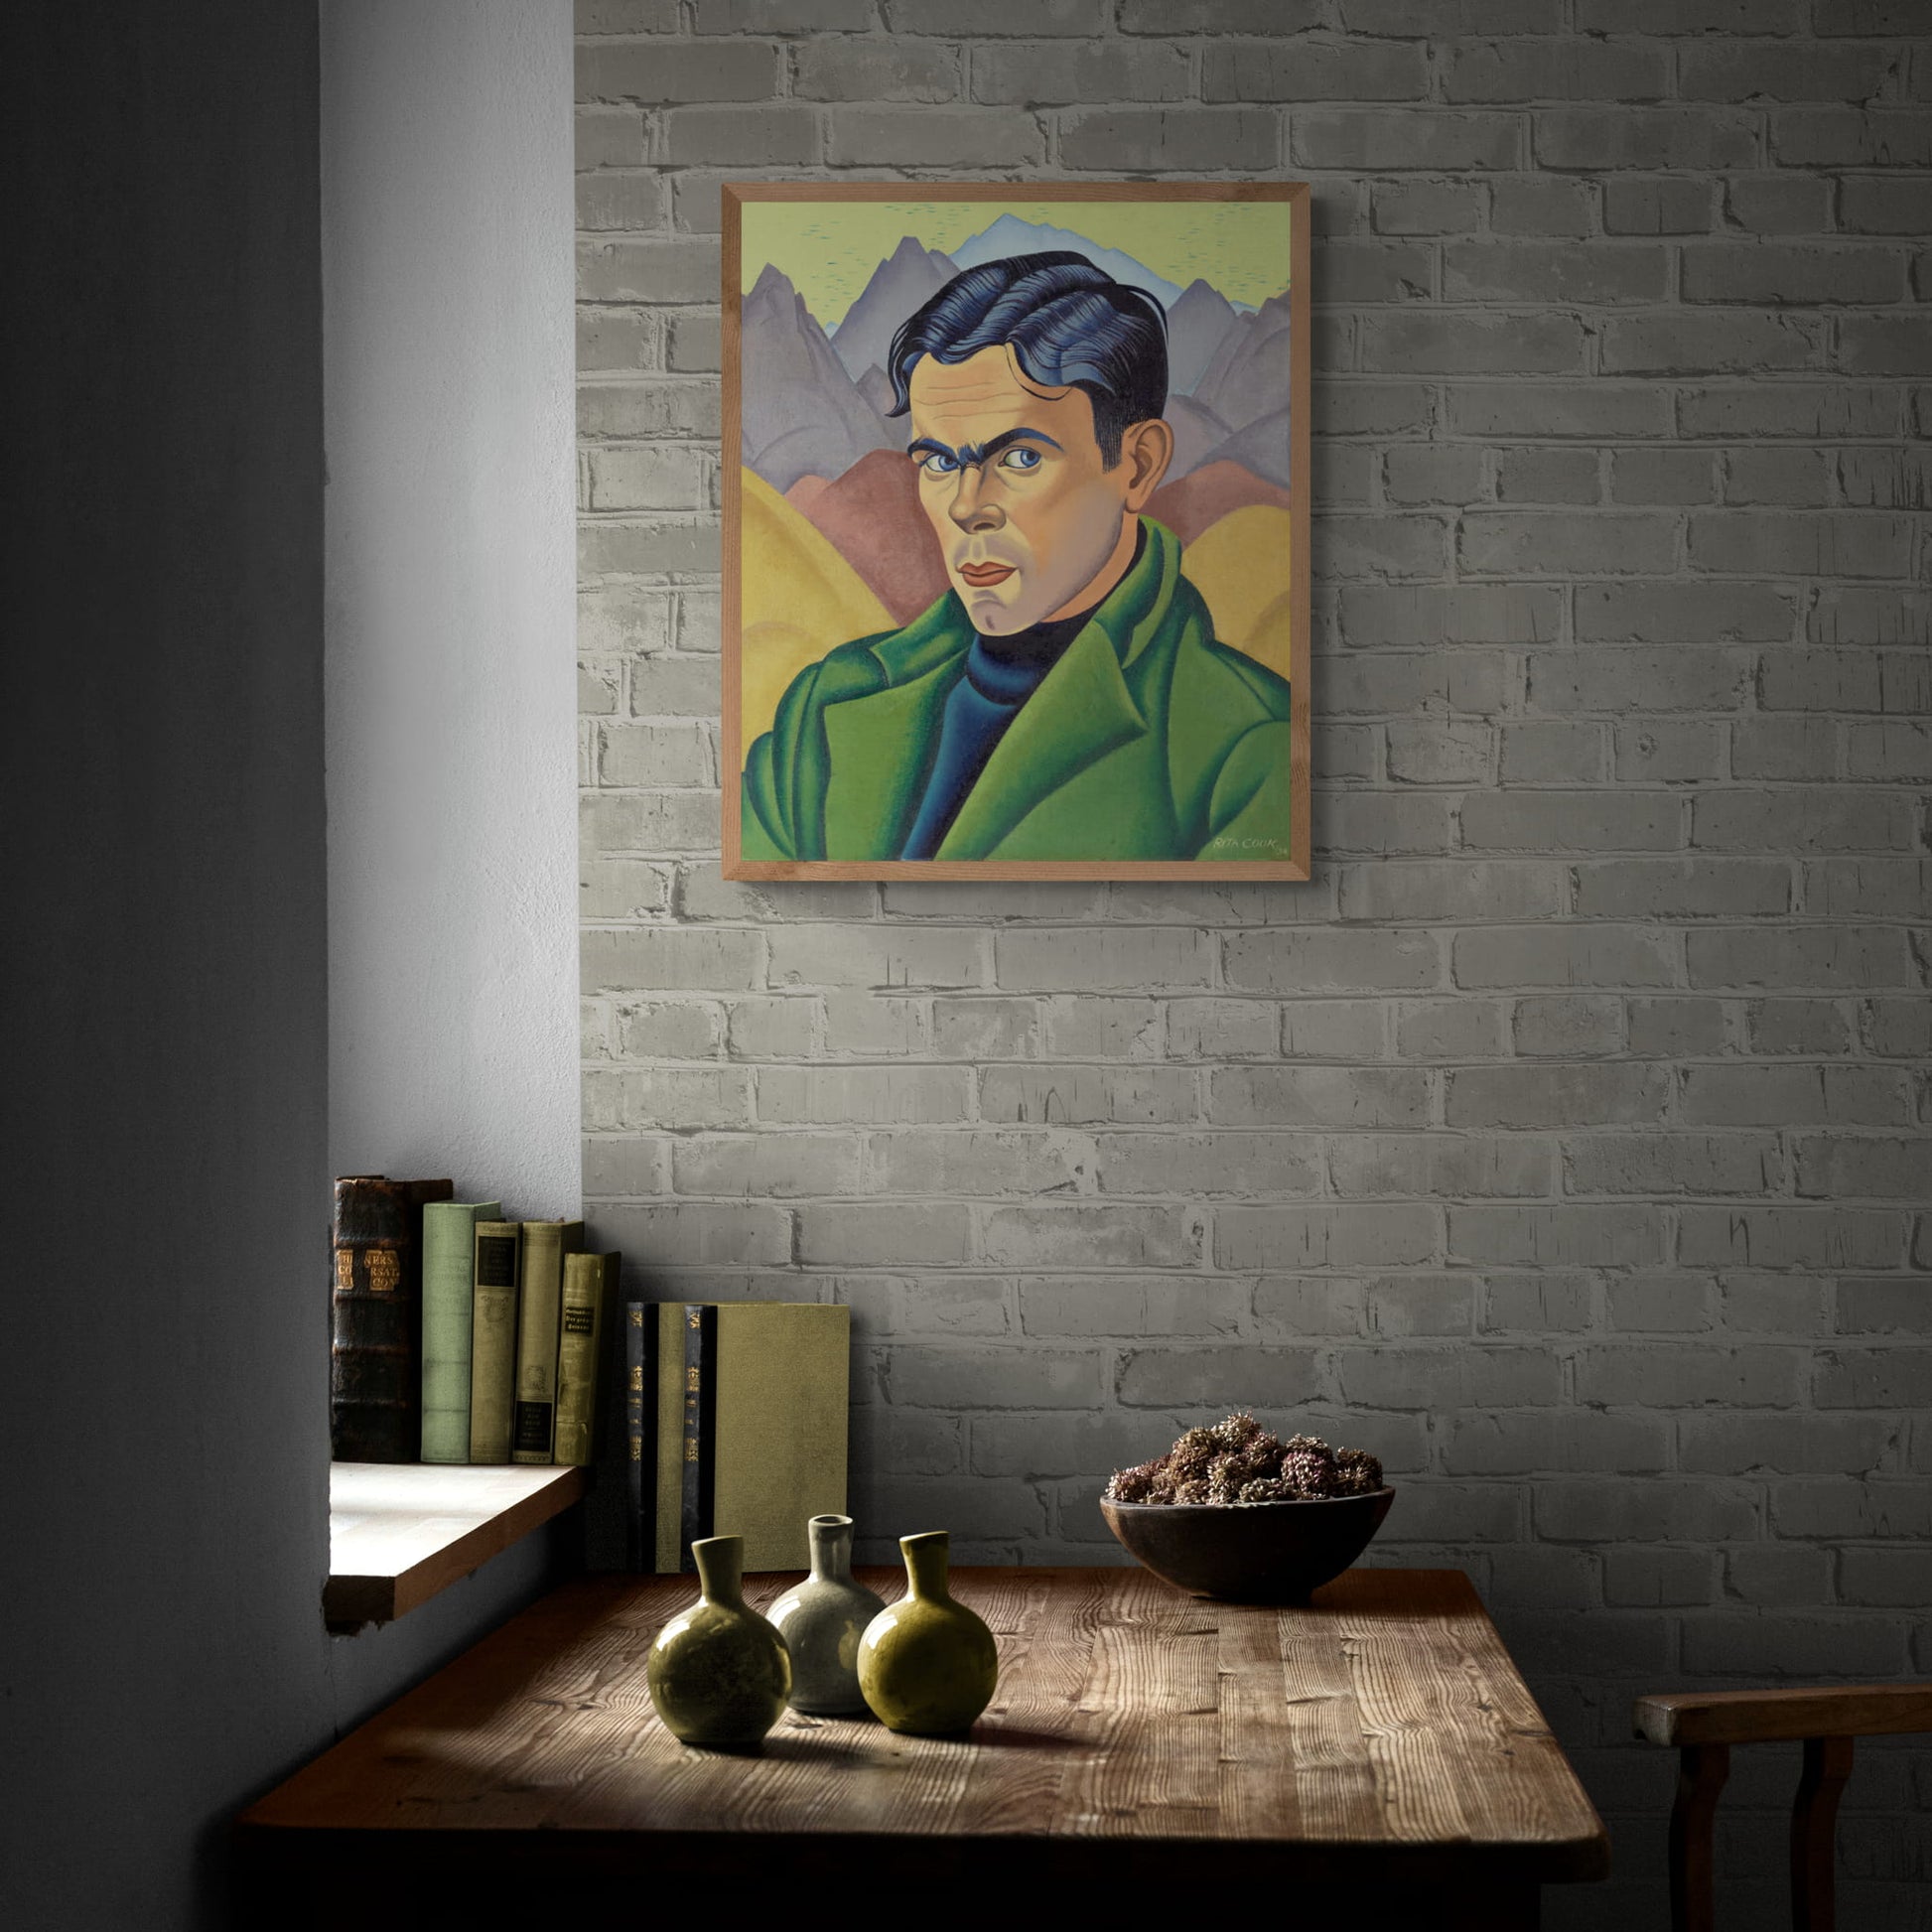 Framed portrait of a man in a green coat against a background of mountains hanging on brick wall.